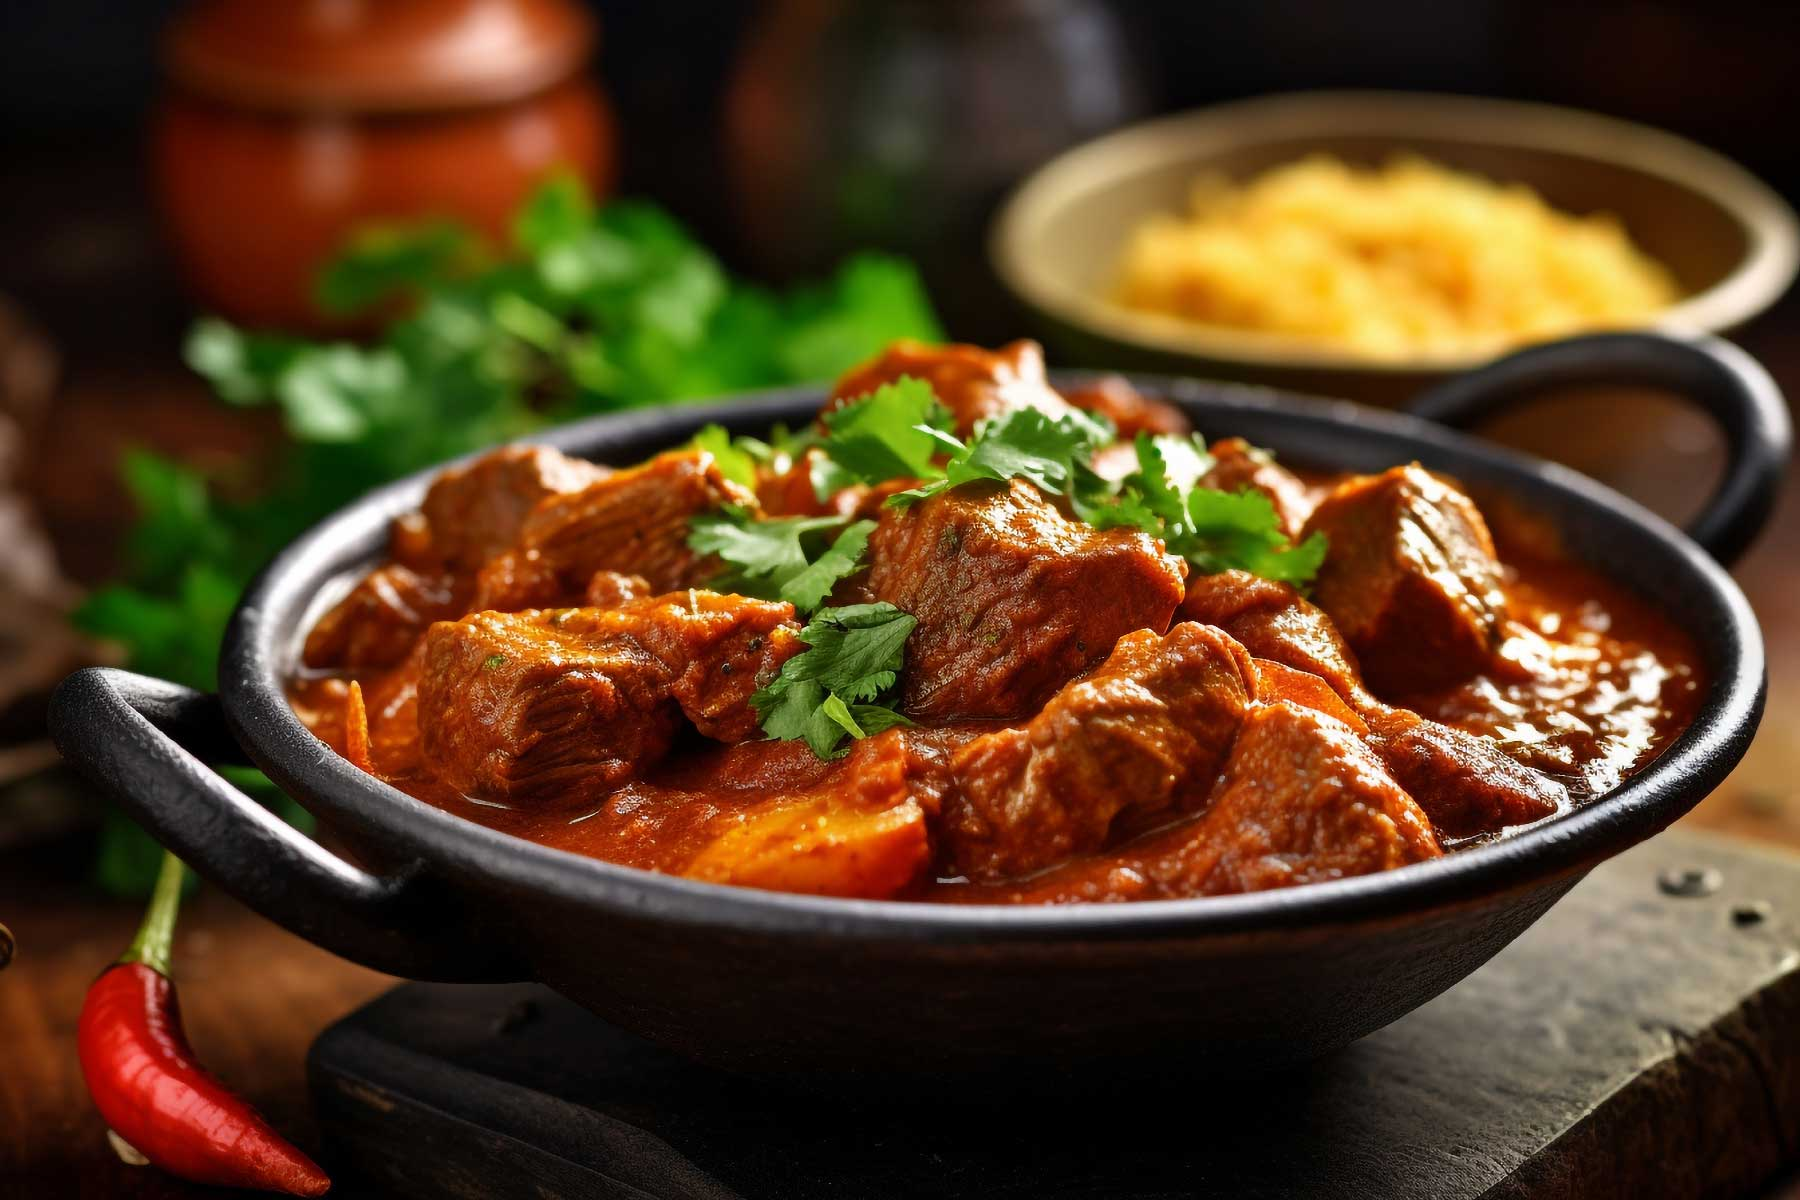 Chicken Tikka Masala: Classic Indian dish with tender chicken in creamy tomato-based sauce.